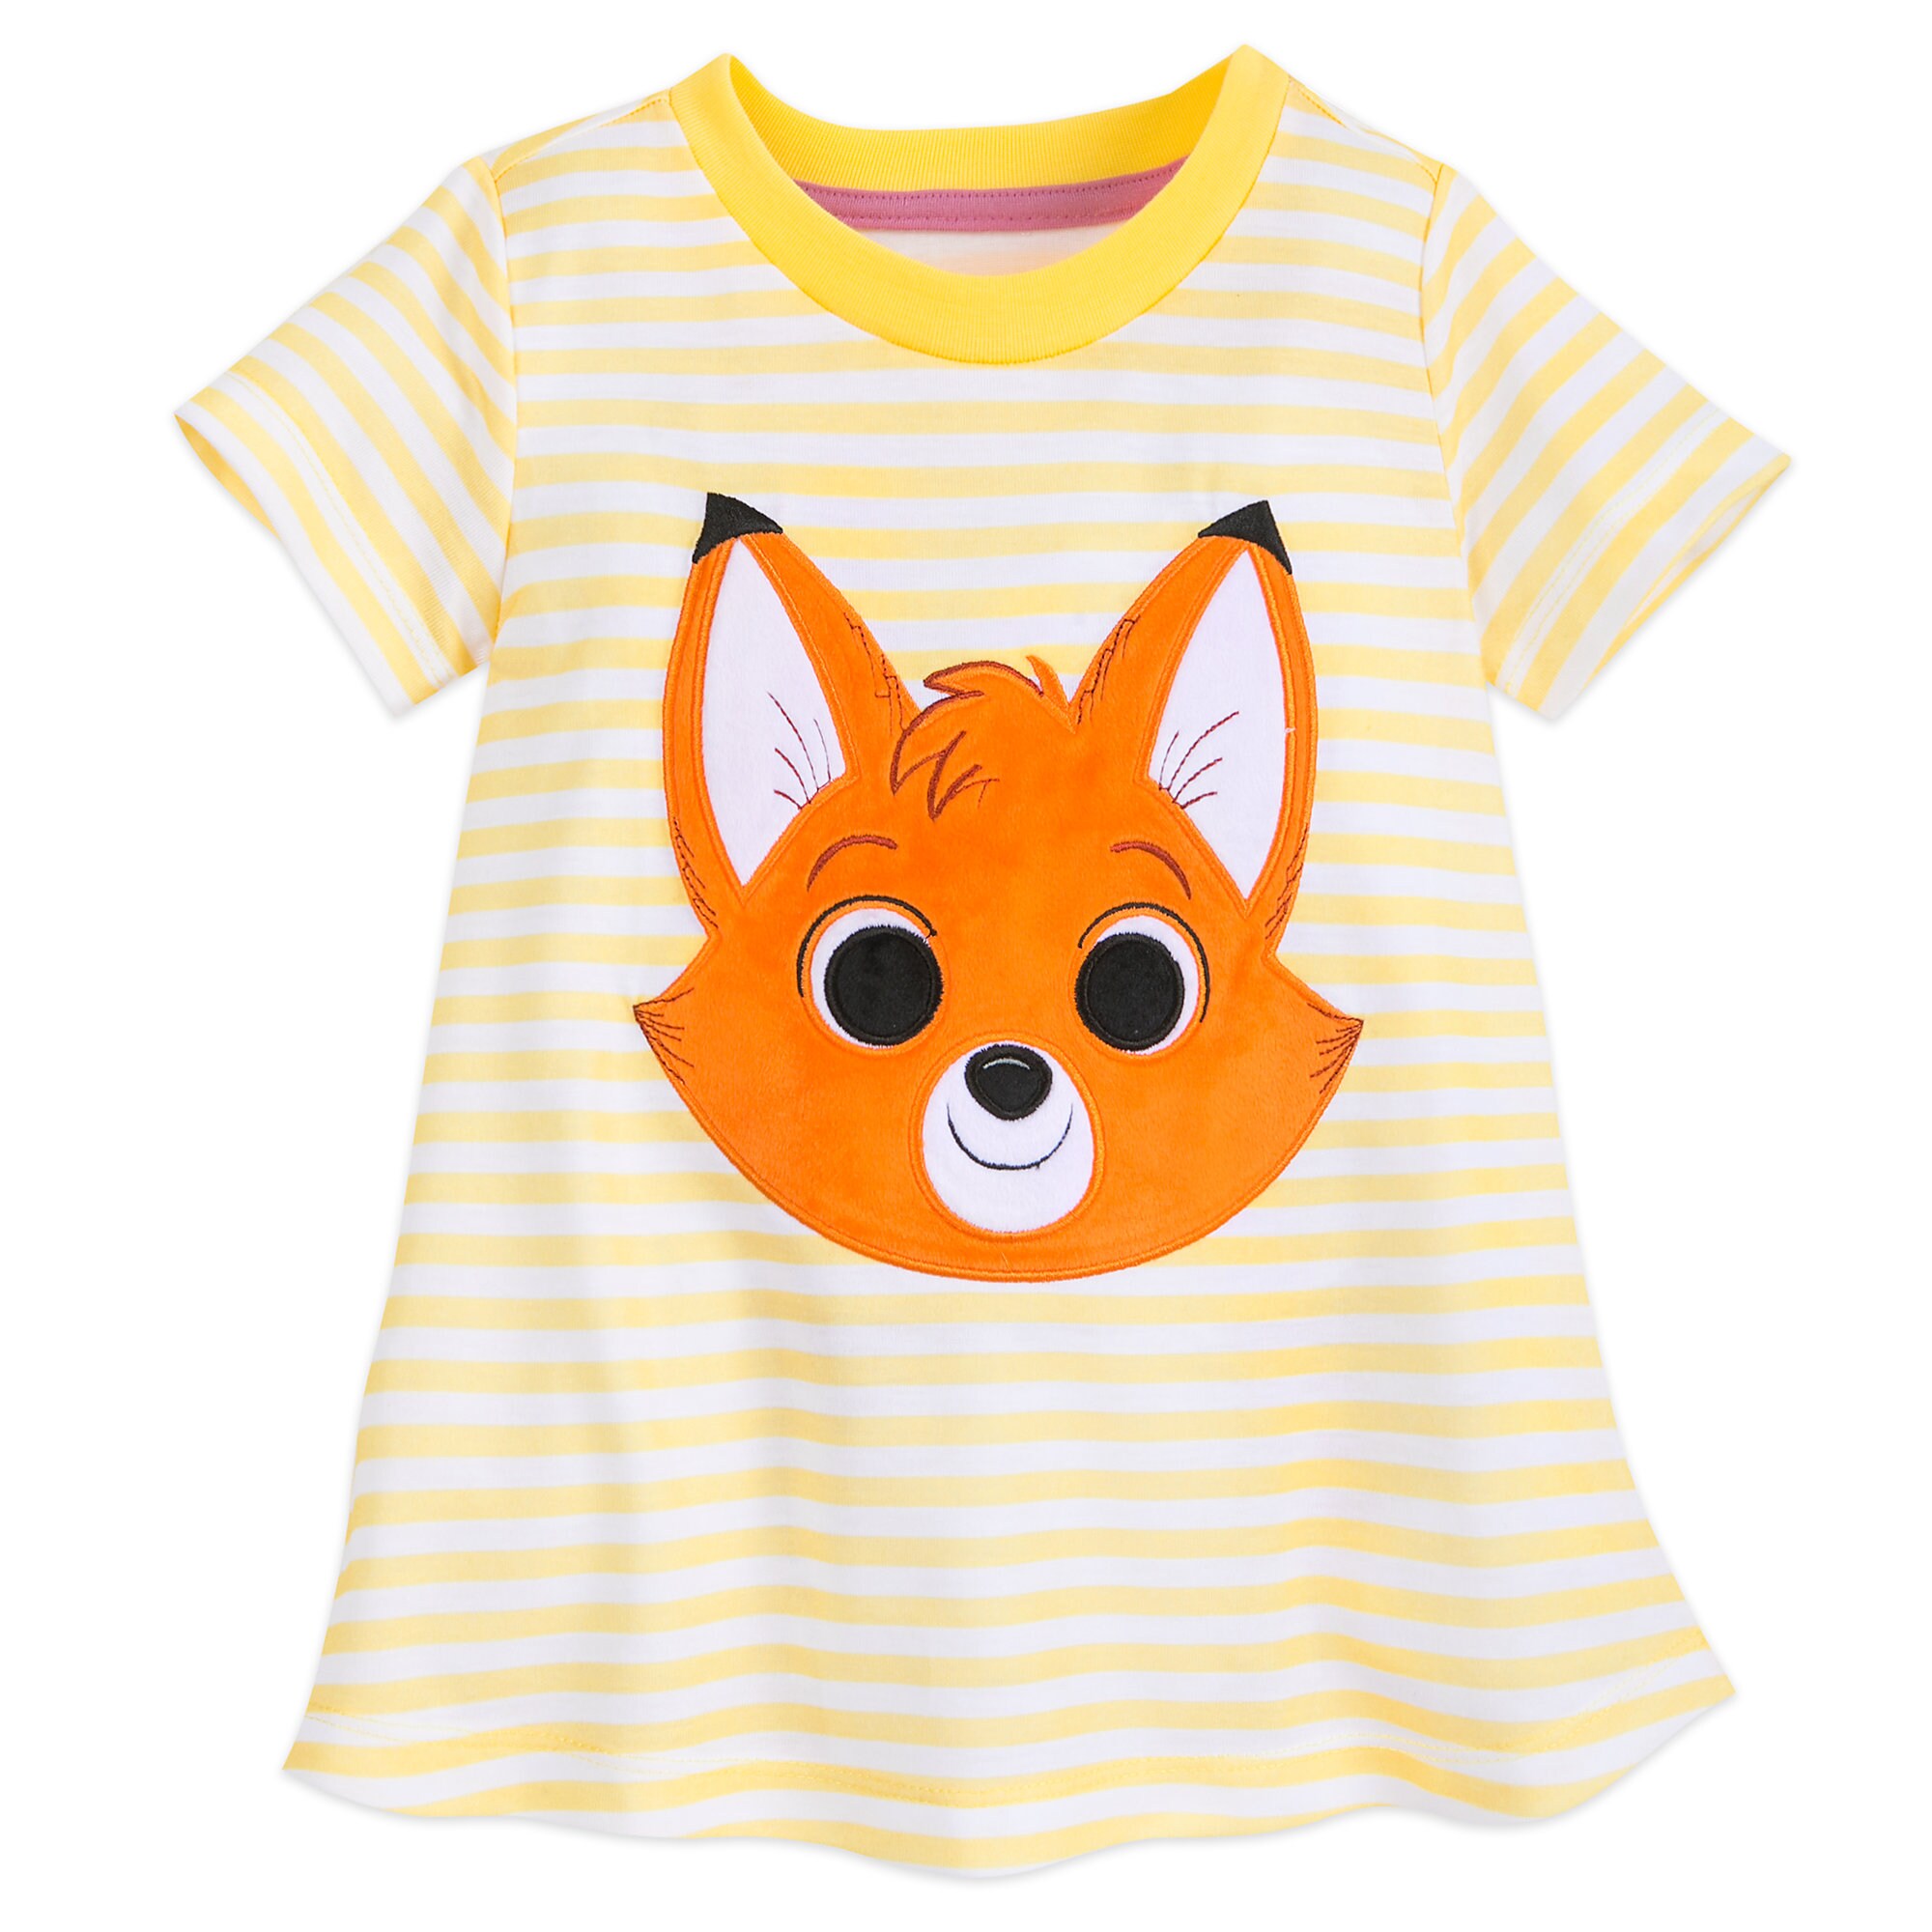 The Fox and the Hound Sleep Set for Girls - Disney Furrytale friends